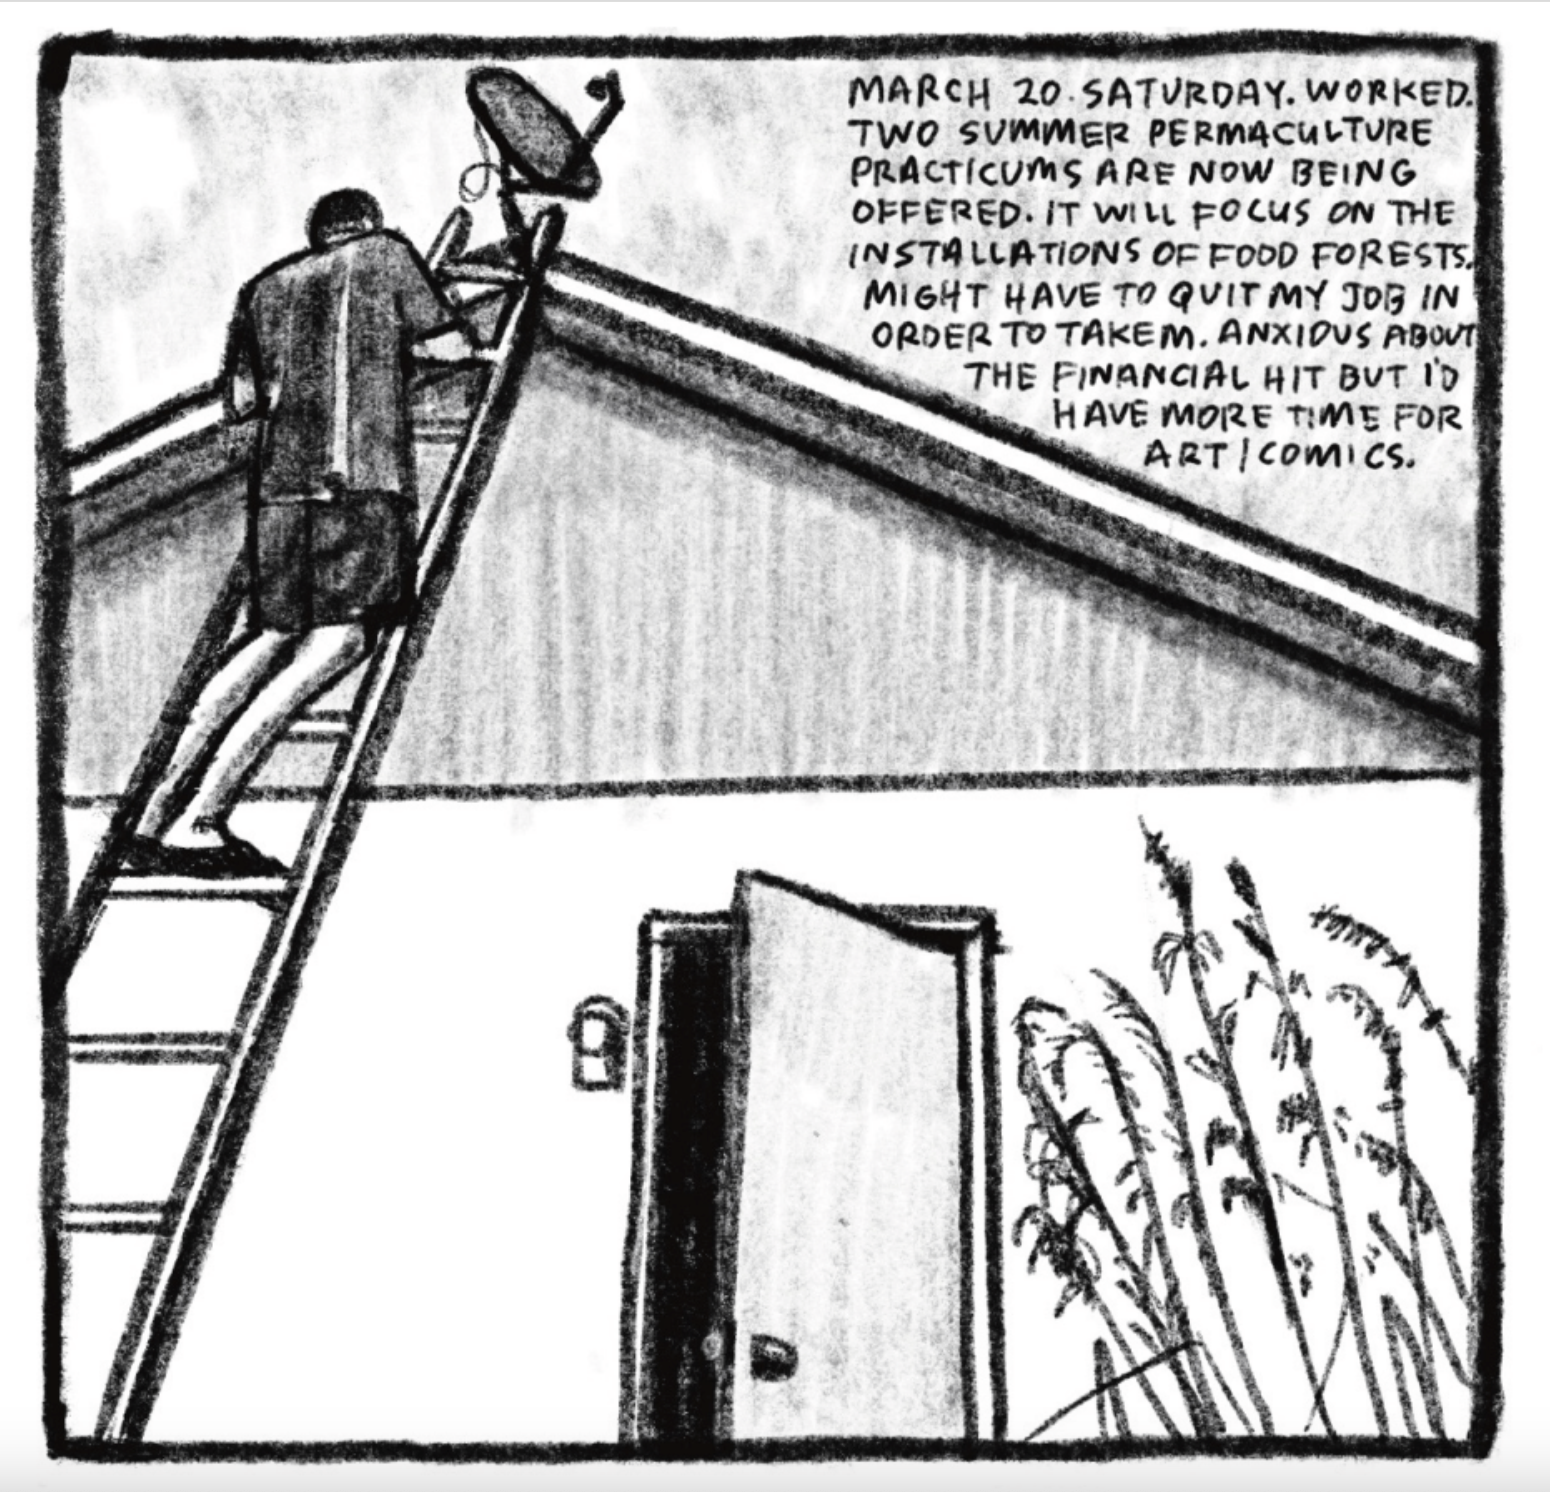 A man, likely Tony, stands on a ladder against the roof of a house, positioned right by a satellite dish. The house door is open. Reeds in the corner add a sense of balance to the panel.
Description reads: "March 20. Saturday. Worked. Two summer permaculture practicums are now being offered. It will focus on the installations of food forests. Might have to quit my job in order to take'm. Anxious about the financial hit but I'd have more time for art/comics."